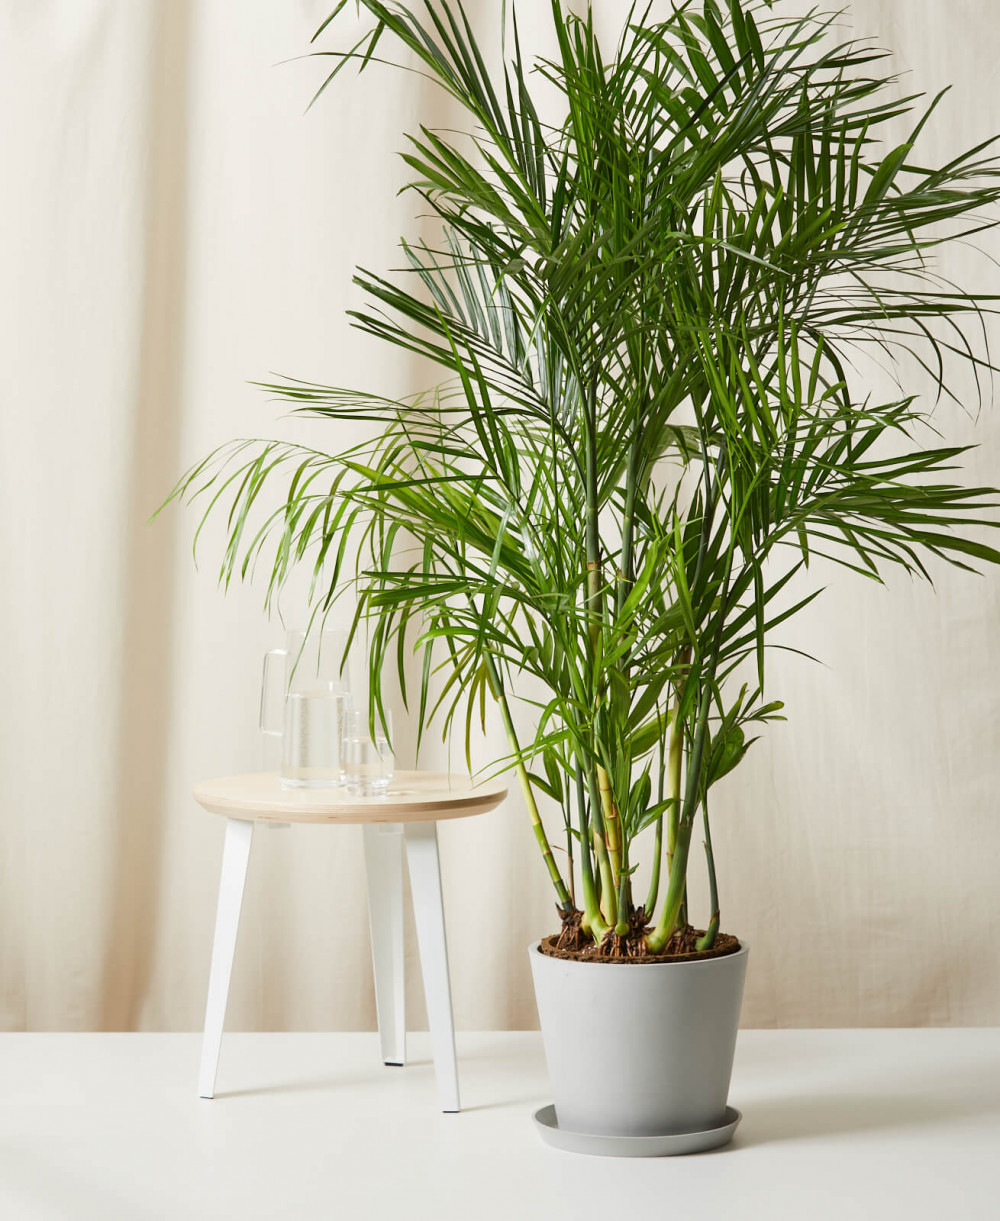 10 Houseplants That Oxygenate And Purify Your Home - 77